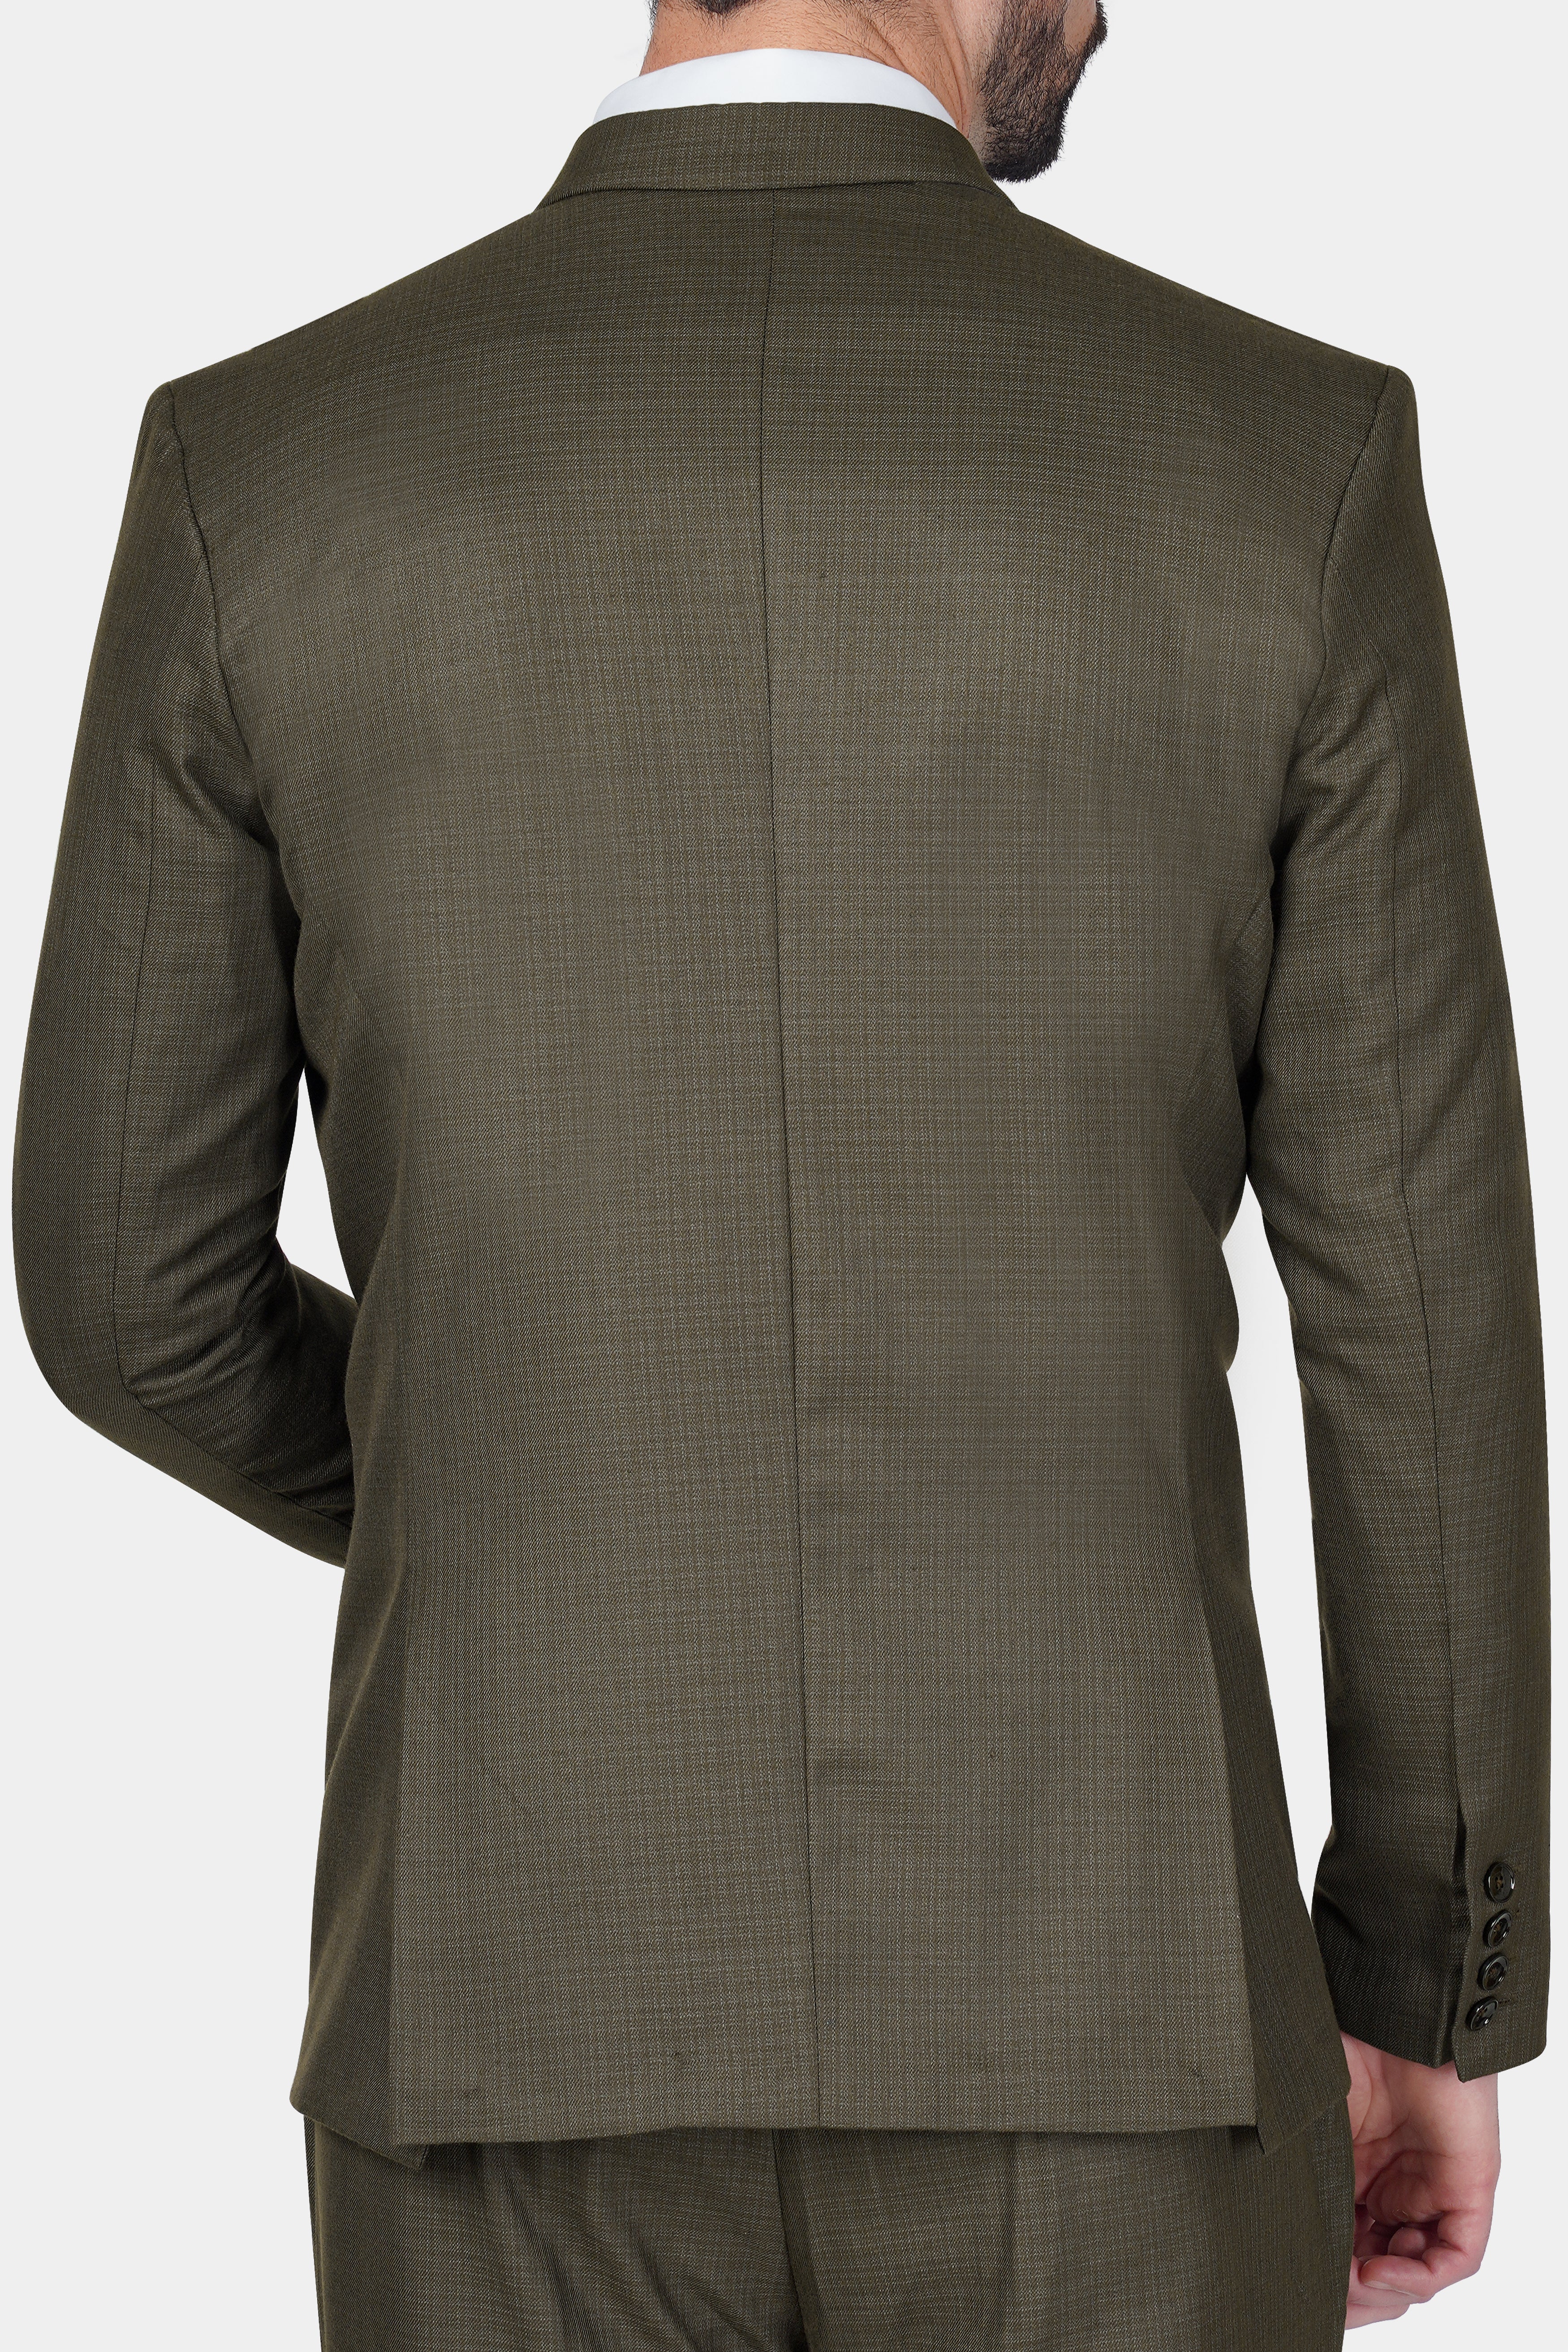 Eclipse Brown Wool Rich Double Breasted Sports Blazer BL3133-DB-PP-36, BL3133-DB-PP-38, BL3133-DB-PP-40, BL3133-DB-PP-42, BL3133-DB-PP-44, BL3133-DB-PP-46, BL3133-DB-PP-48, BL3133-DB-PP-50, BL3133-DB-PP-52, BL3133-DB-PP-54, BL3133-DB-PP-56, BL3133-DB-PP-58, BL3133-DB-PP-60